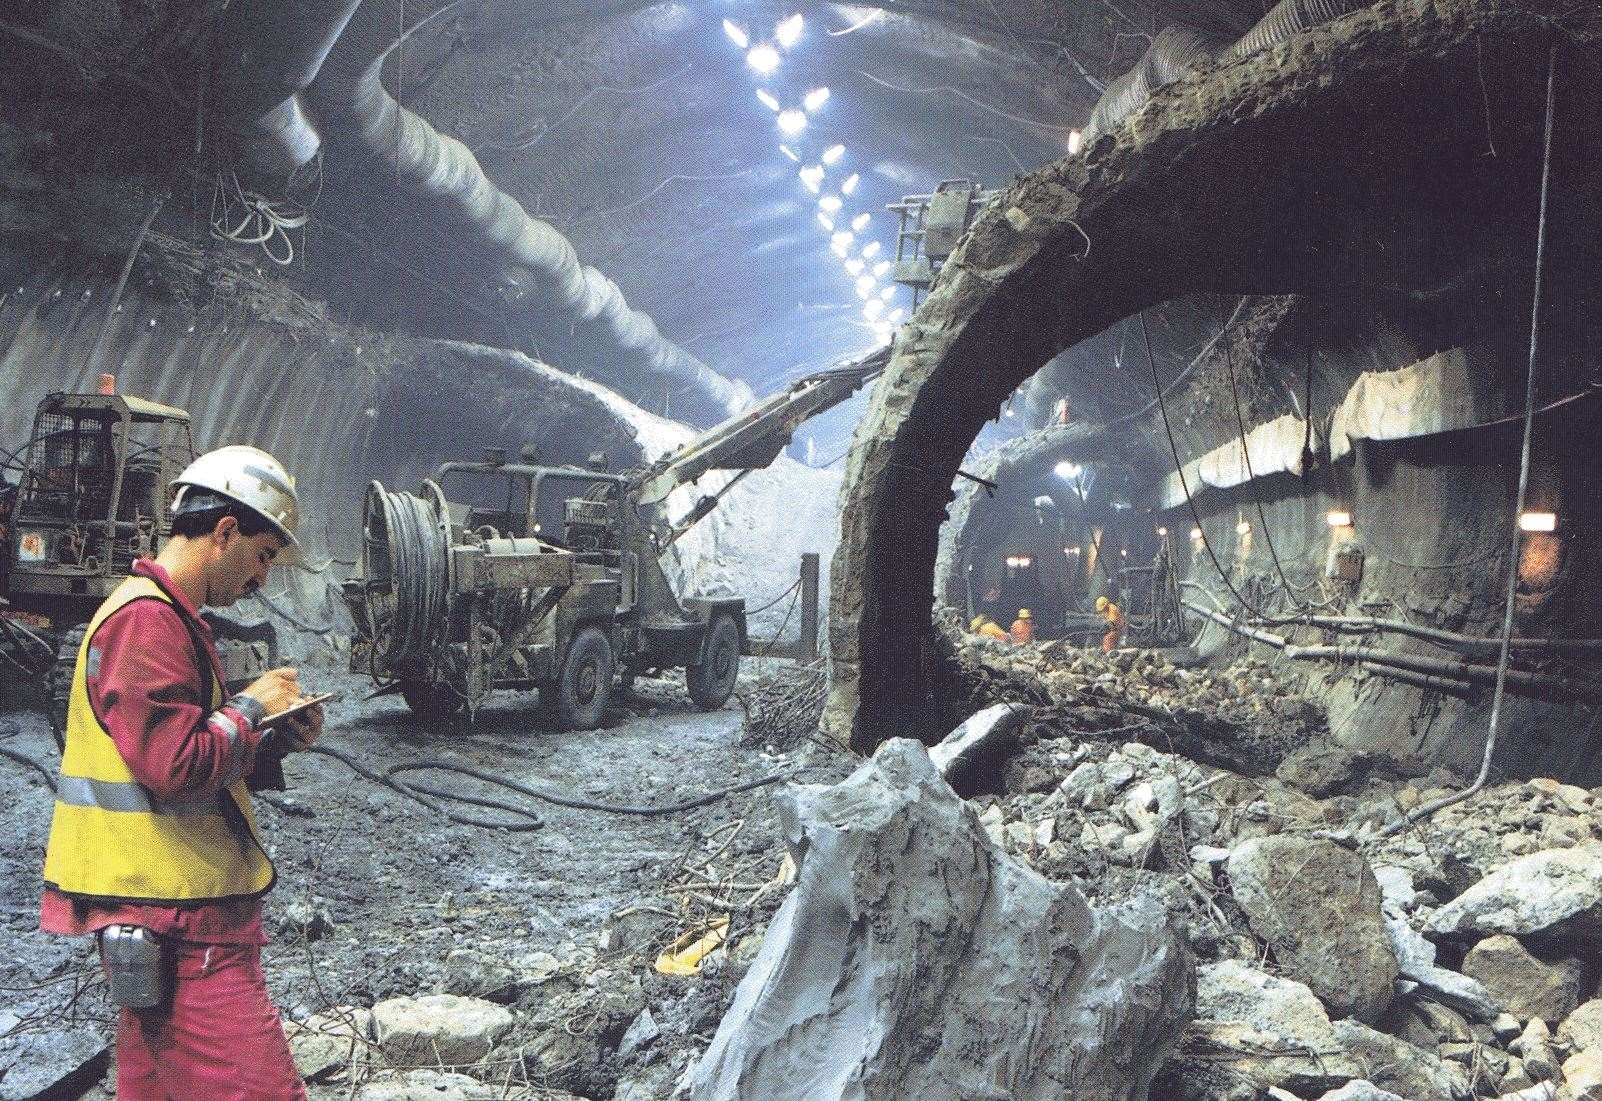 While building the Channel Tunnel, experts were able to gauge the size of the 1580 quake